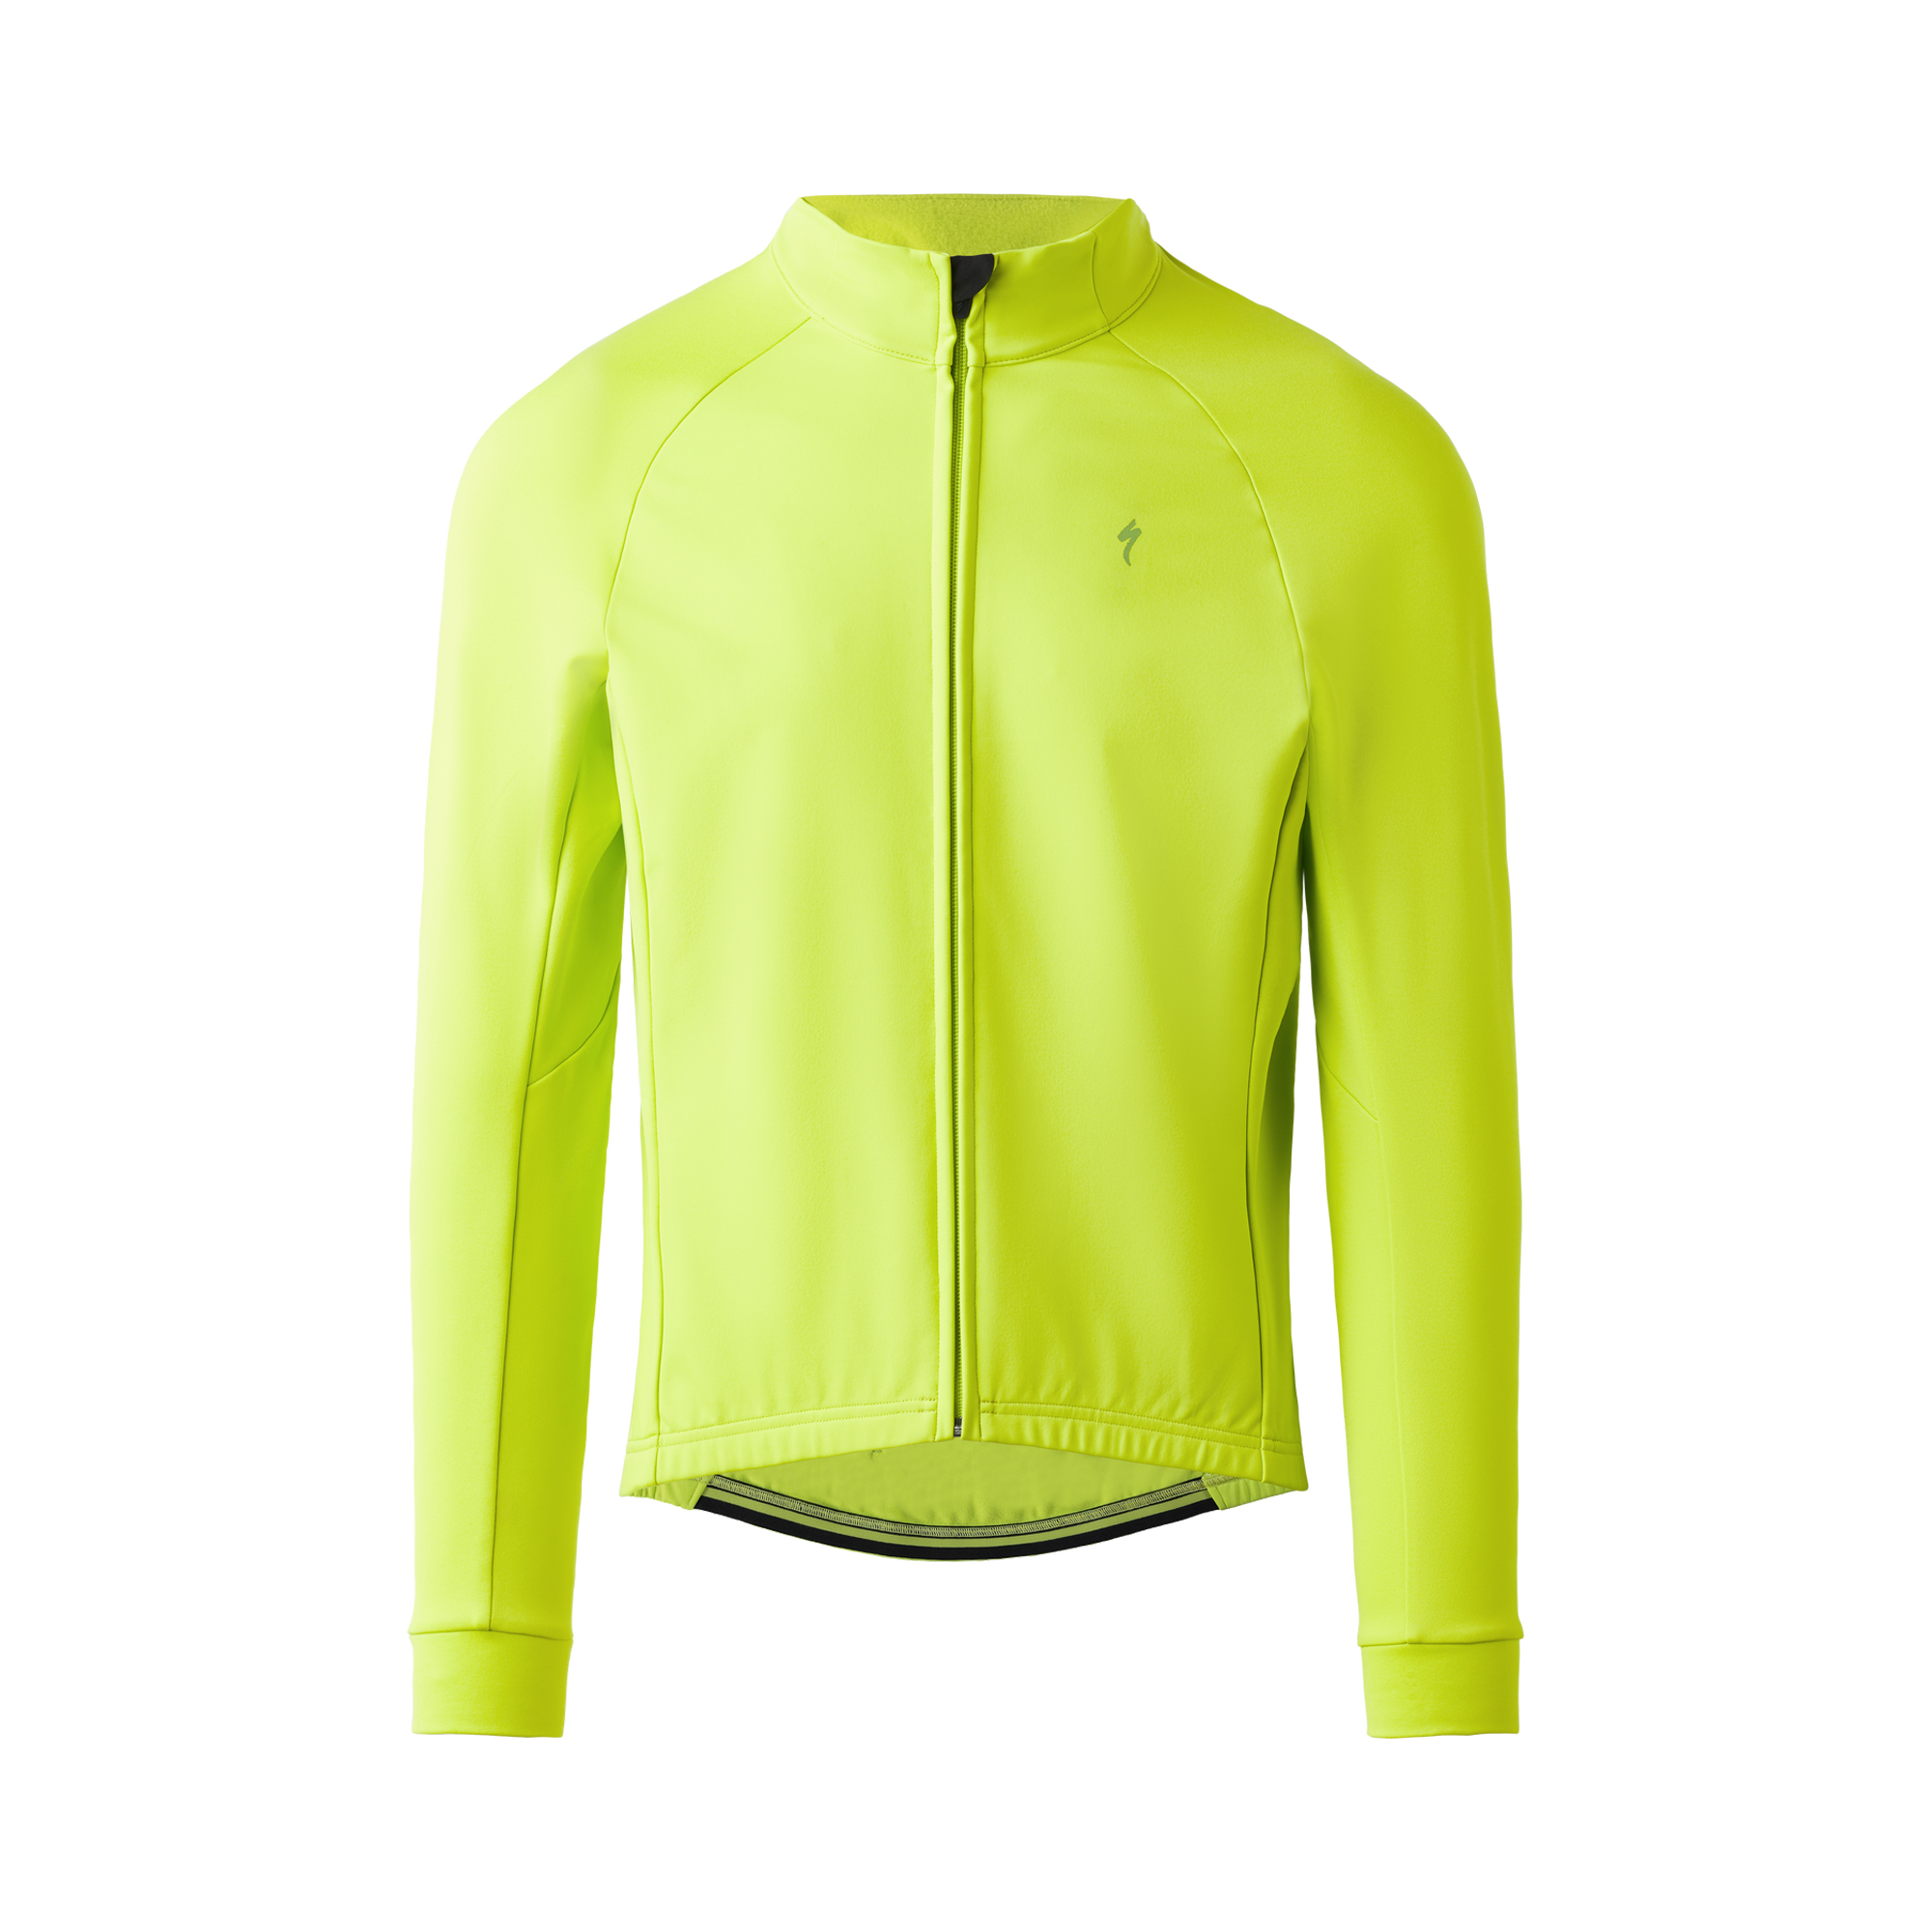 Men's HyprViz Therminal™ Wind Long Sleeve Jersey